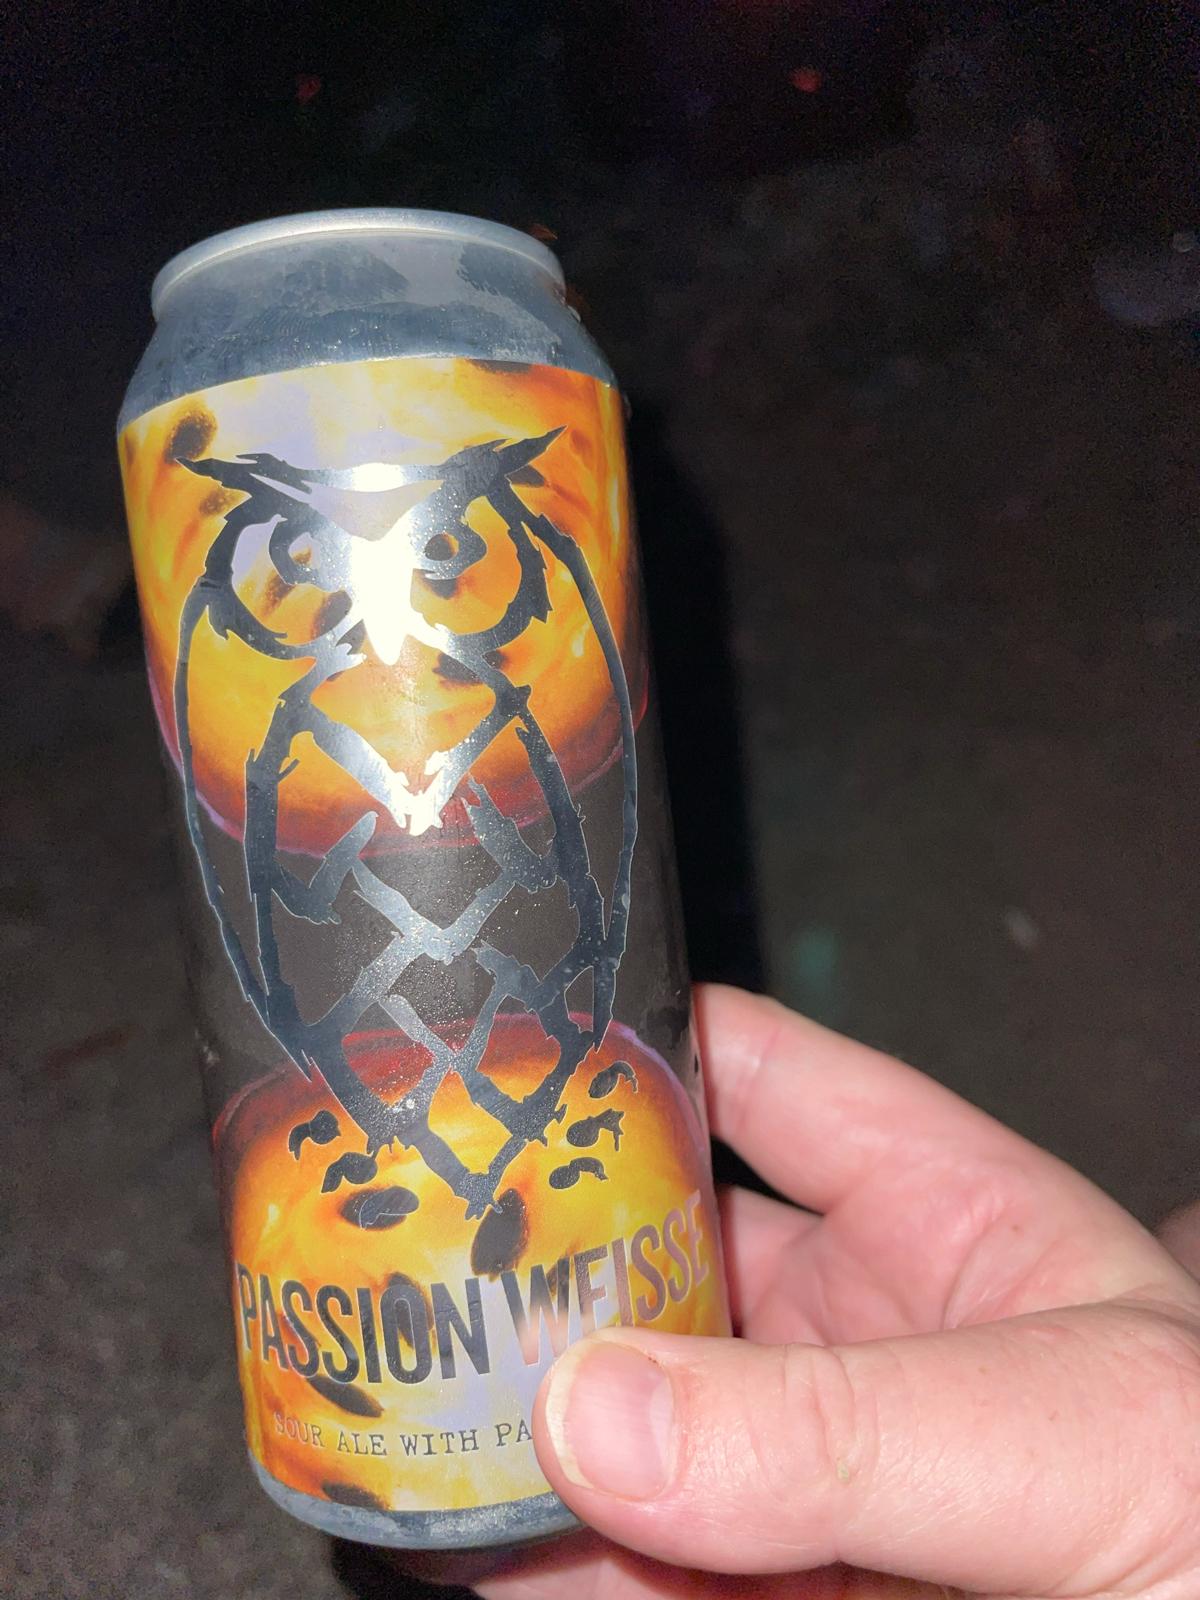 Passion Weisse